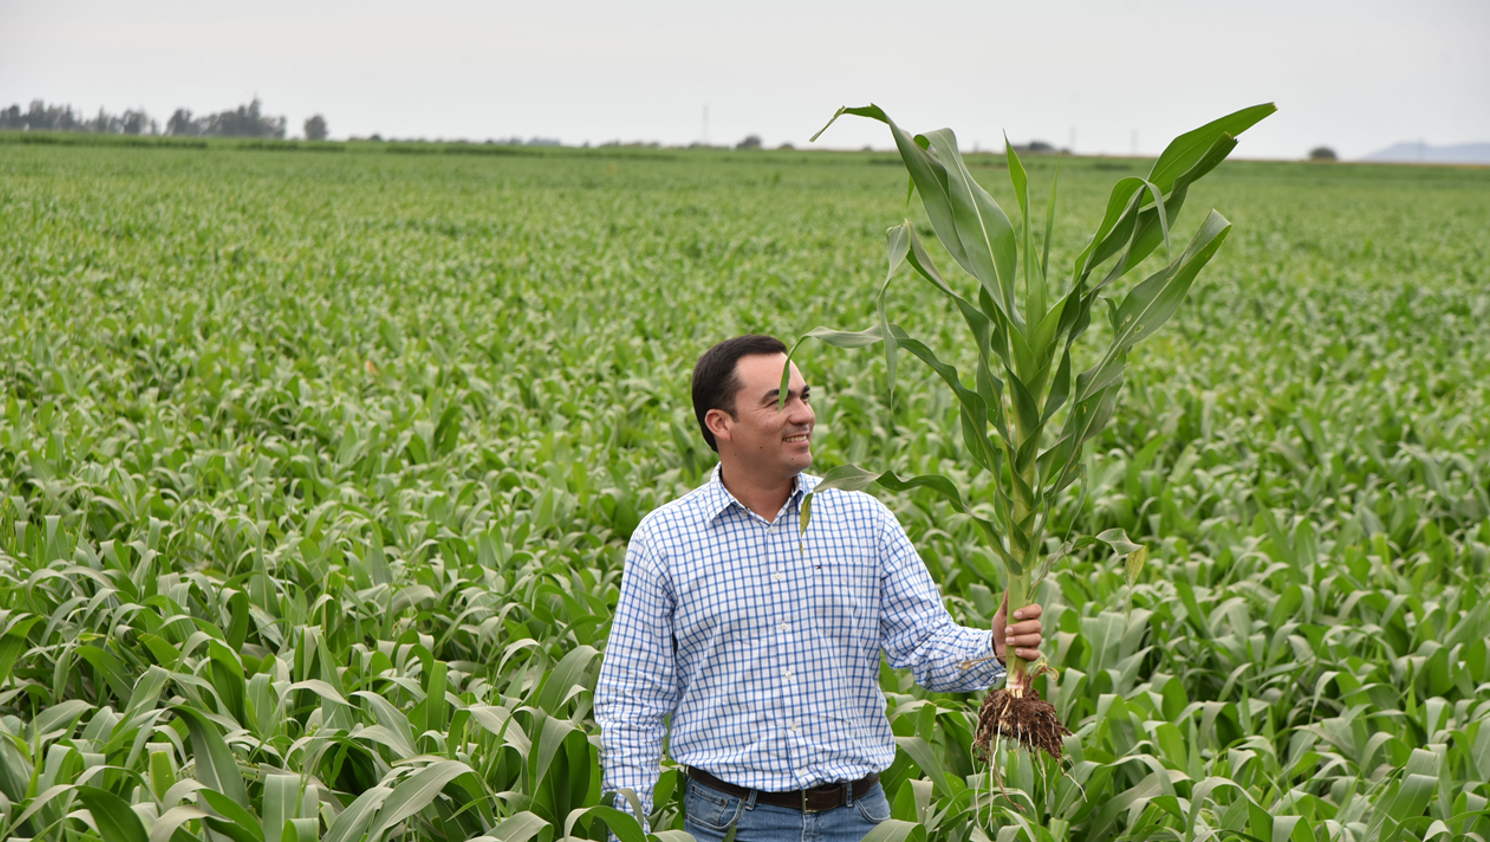 Man standing in corn field with plant in his hand